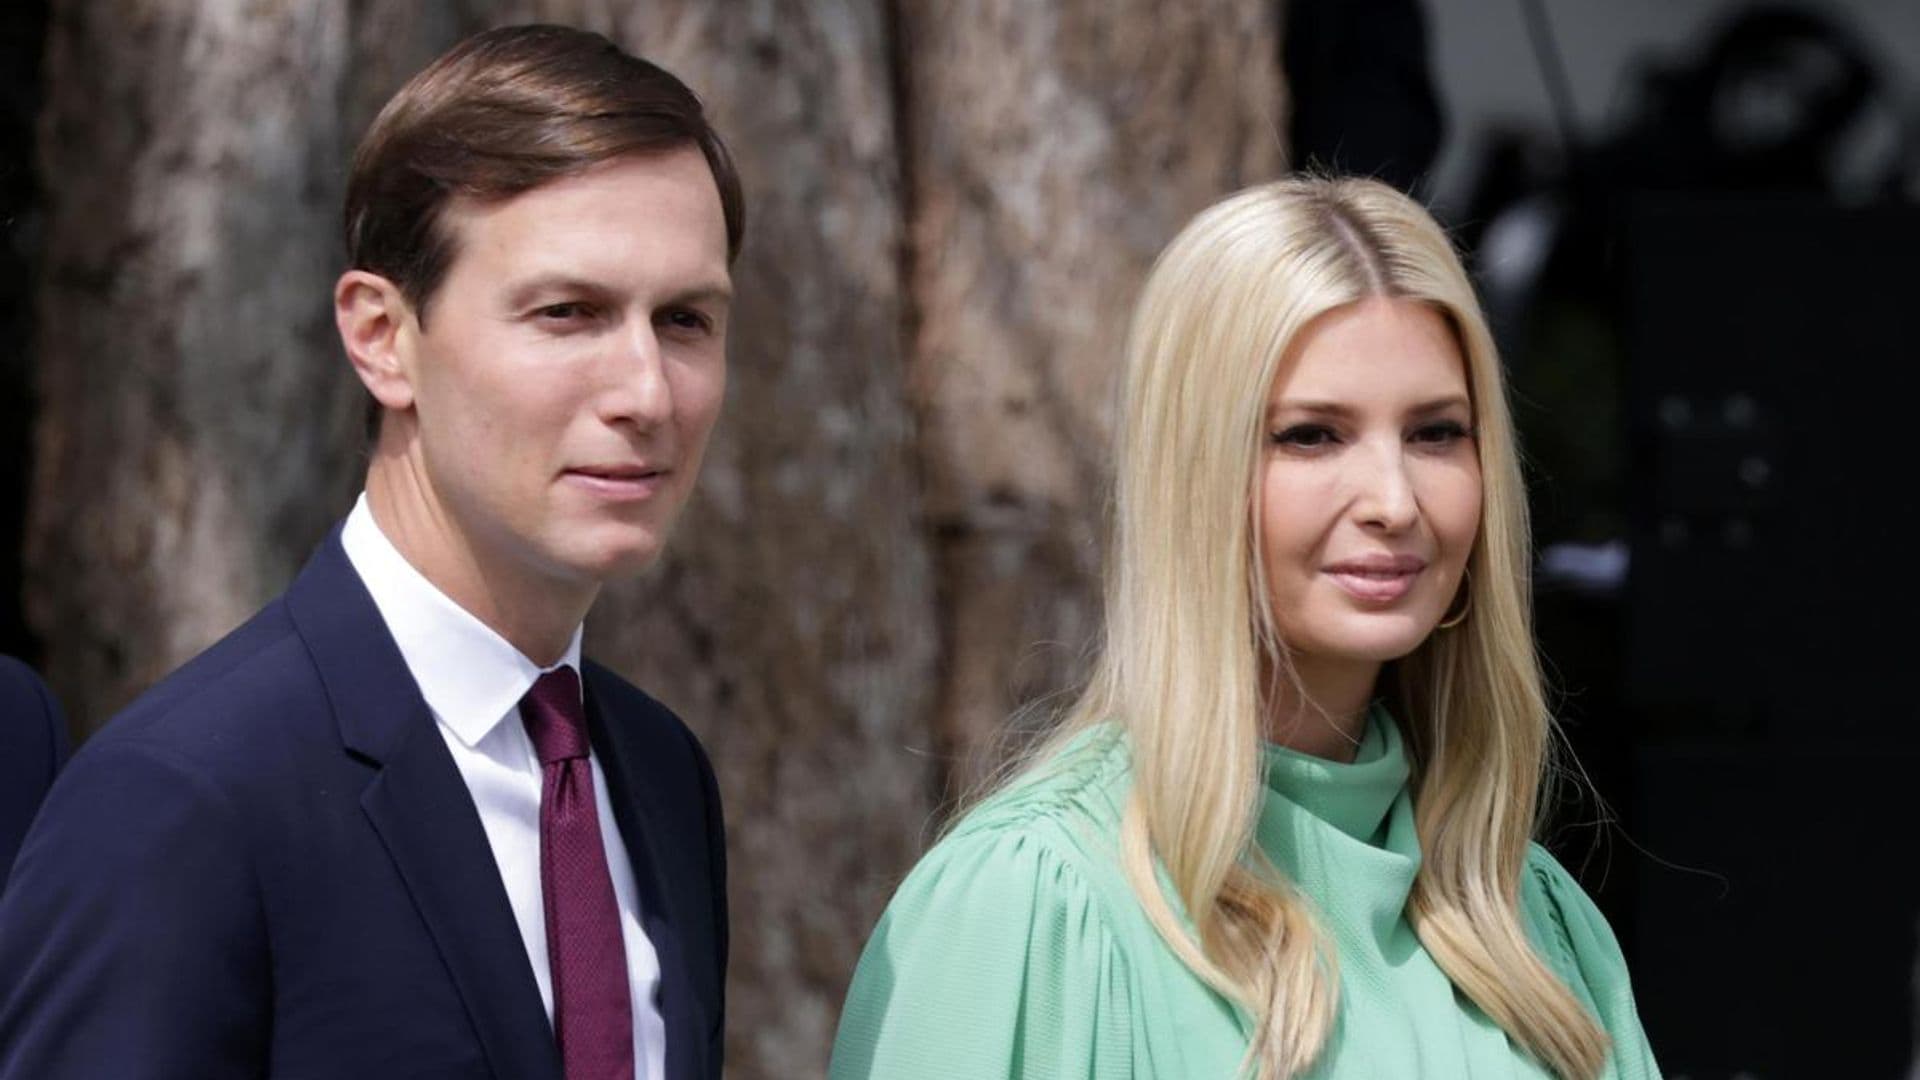 Ivanka Trump and Jared Kushner celebrated Valentine’s Day with a beachside picnic alongside their three children